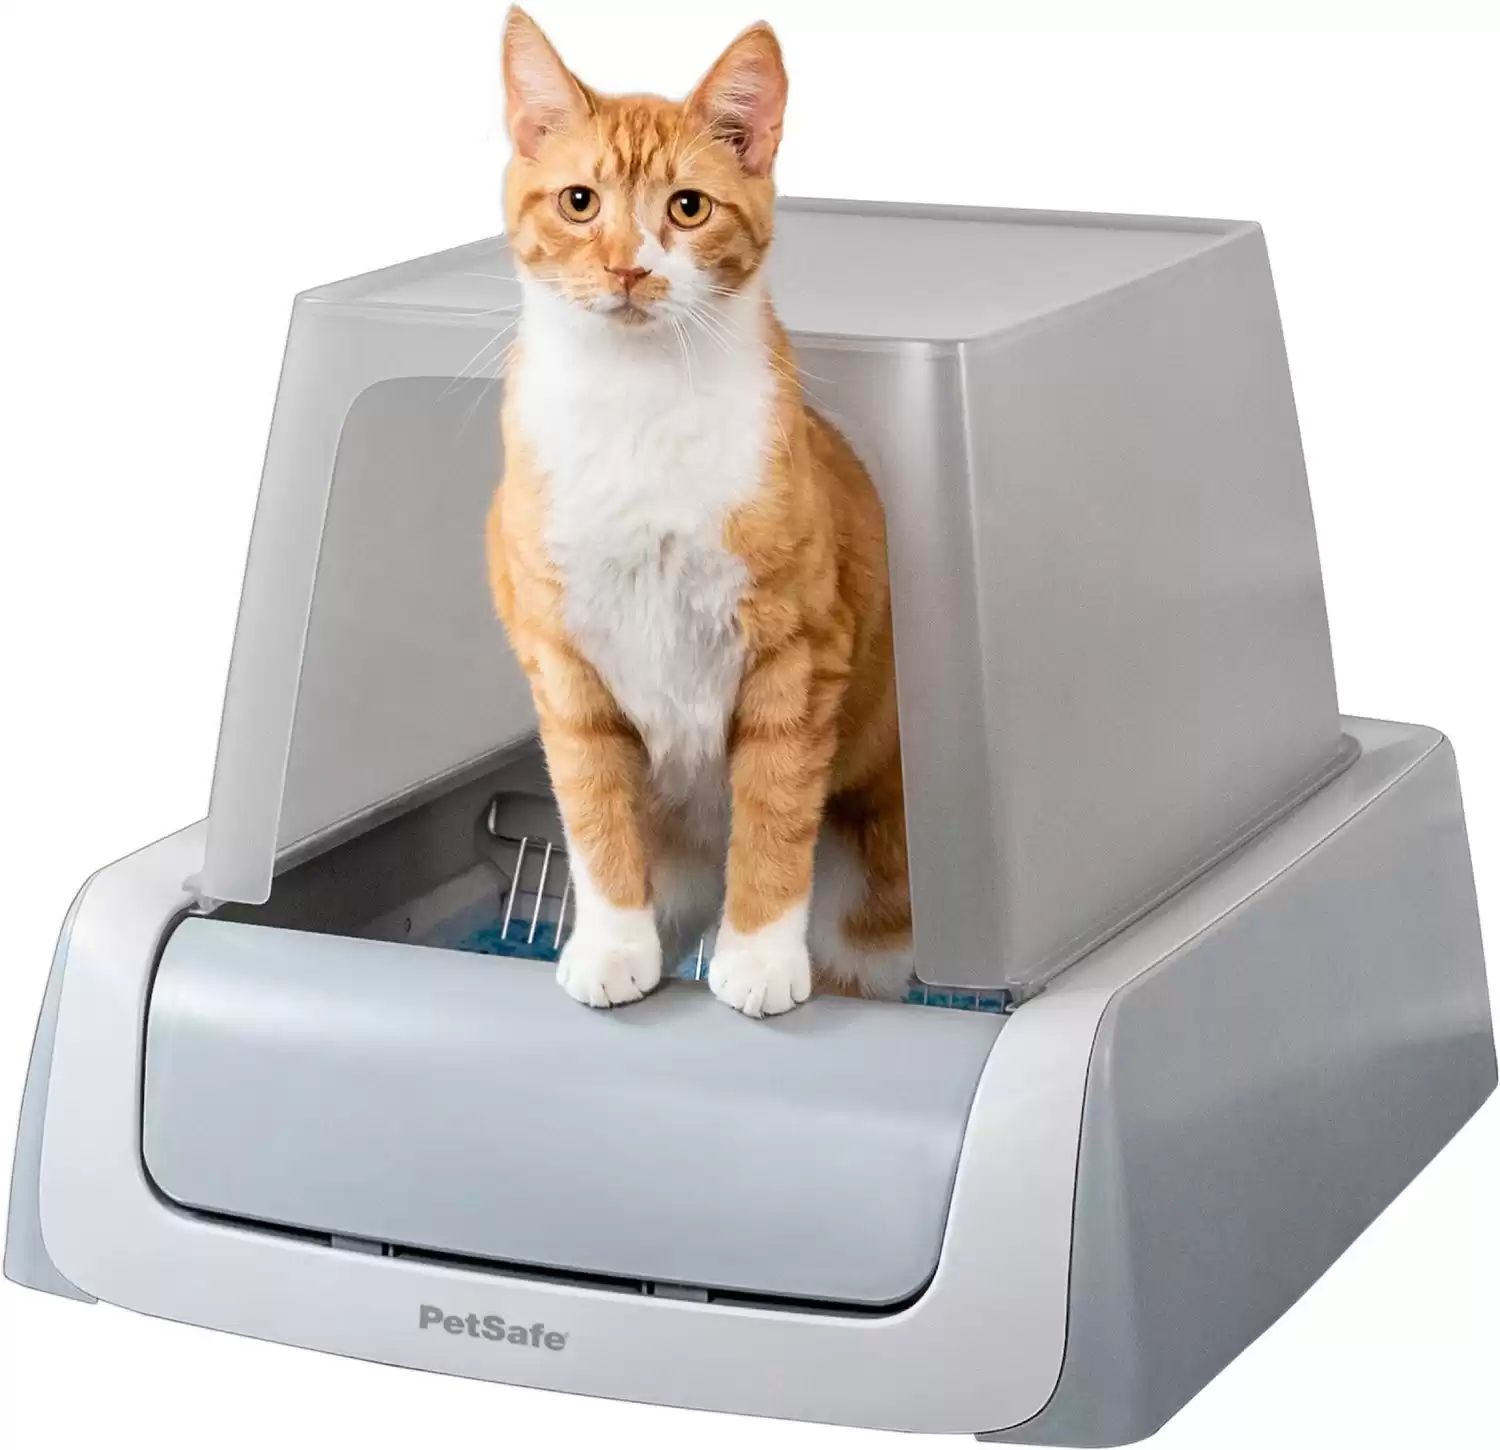 ScoopFree Covered Automatic Self-Cleaning Cat Litter Box